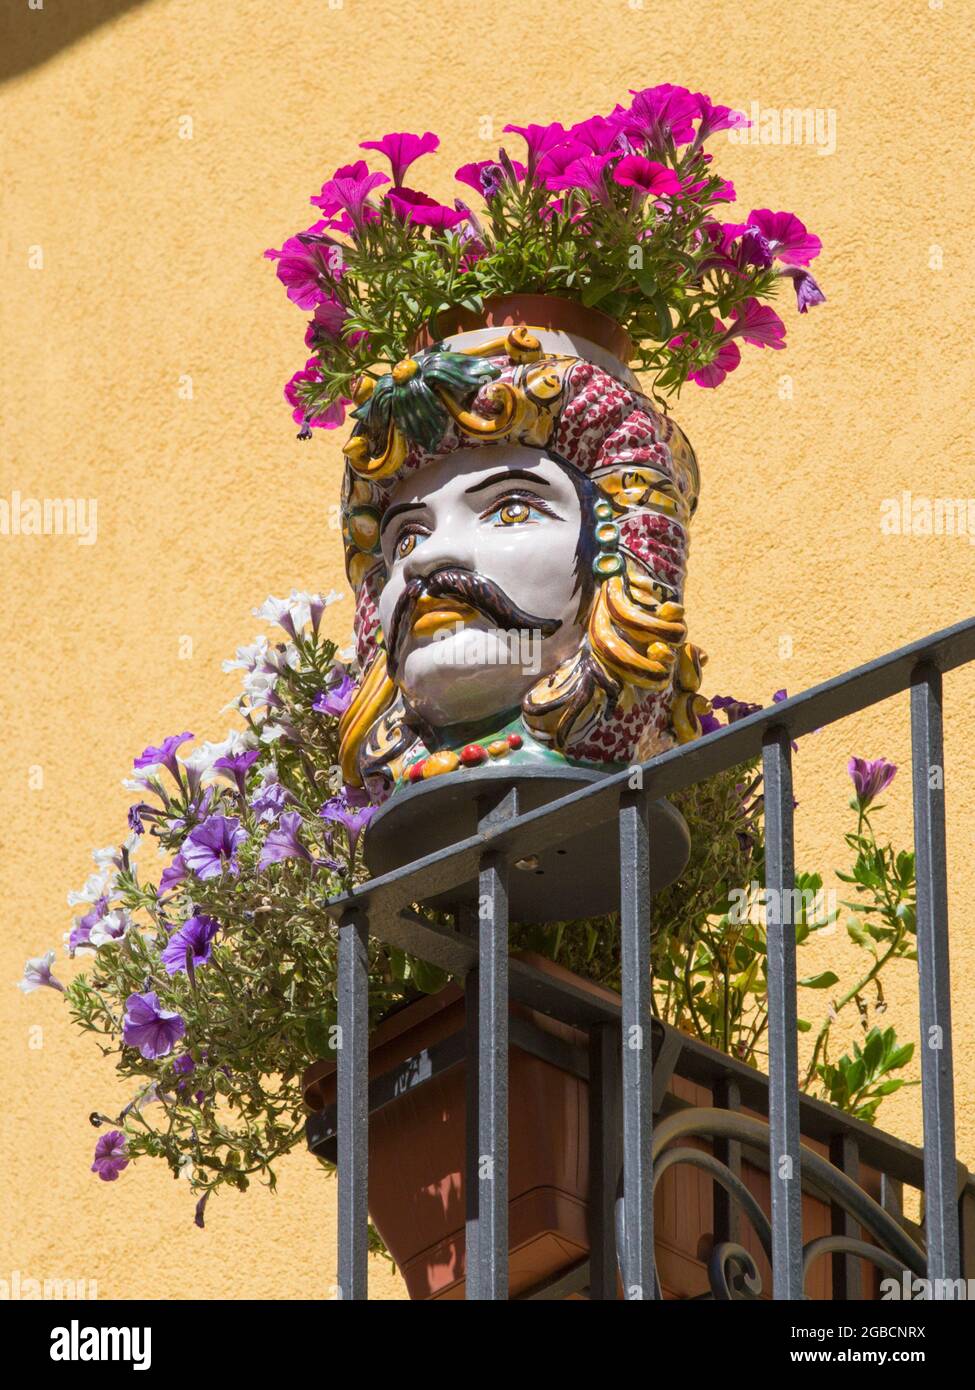 Taormina, Messina, Sicily, Italy. Low angle view of magnificent ceramic Testa di Moro flowerpot in the form of a Moor's head. Stock Photo